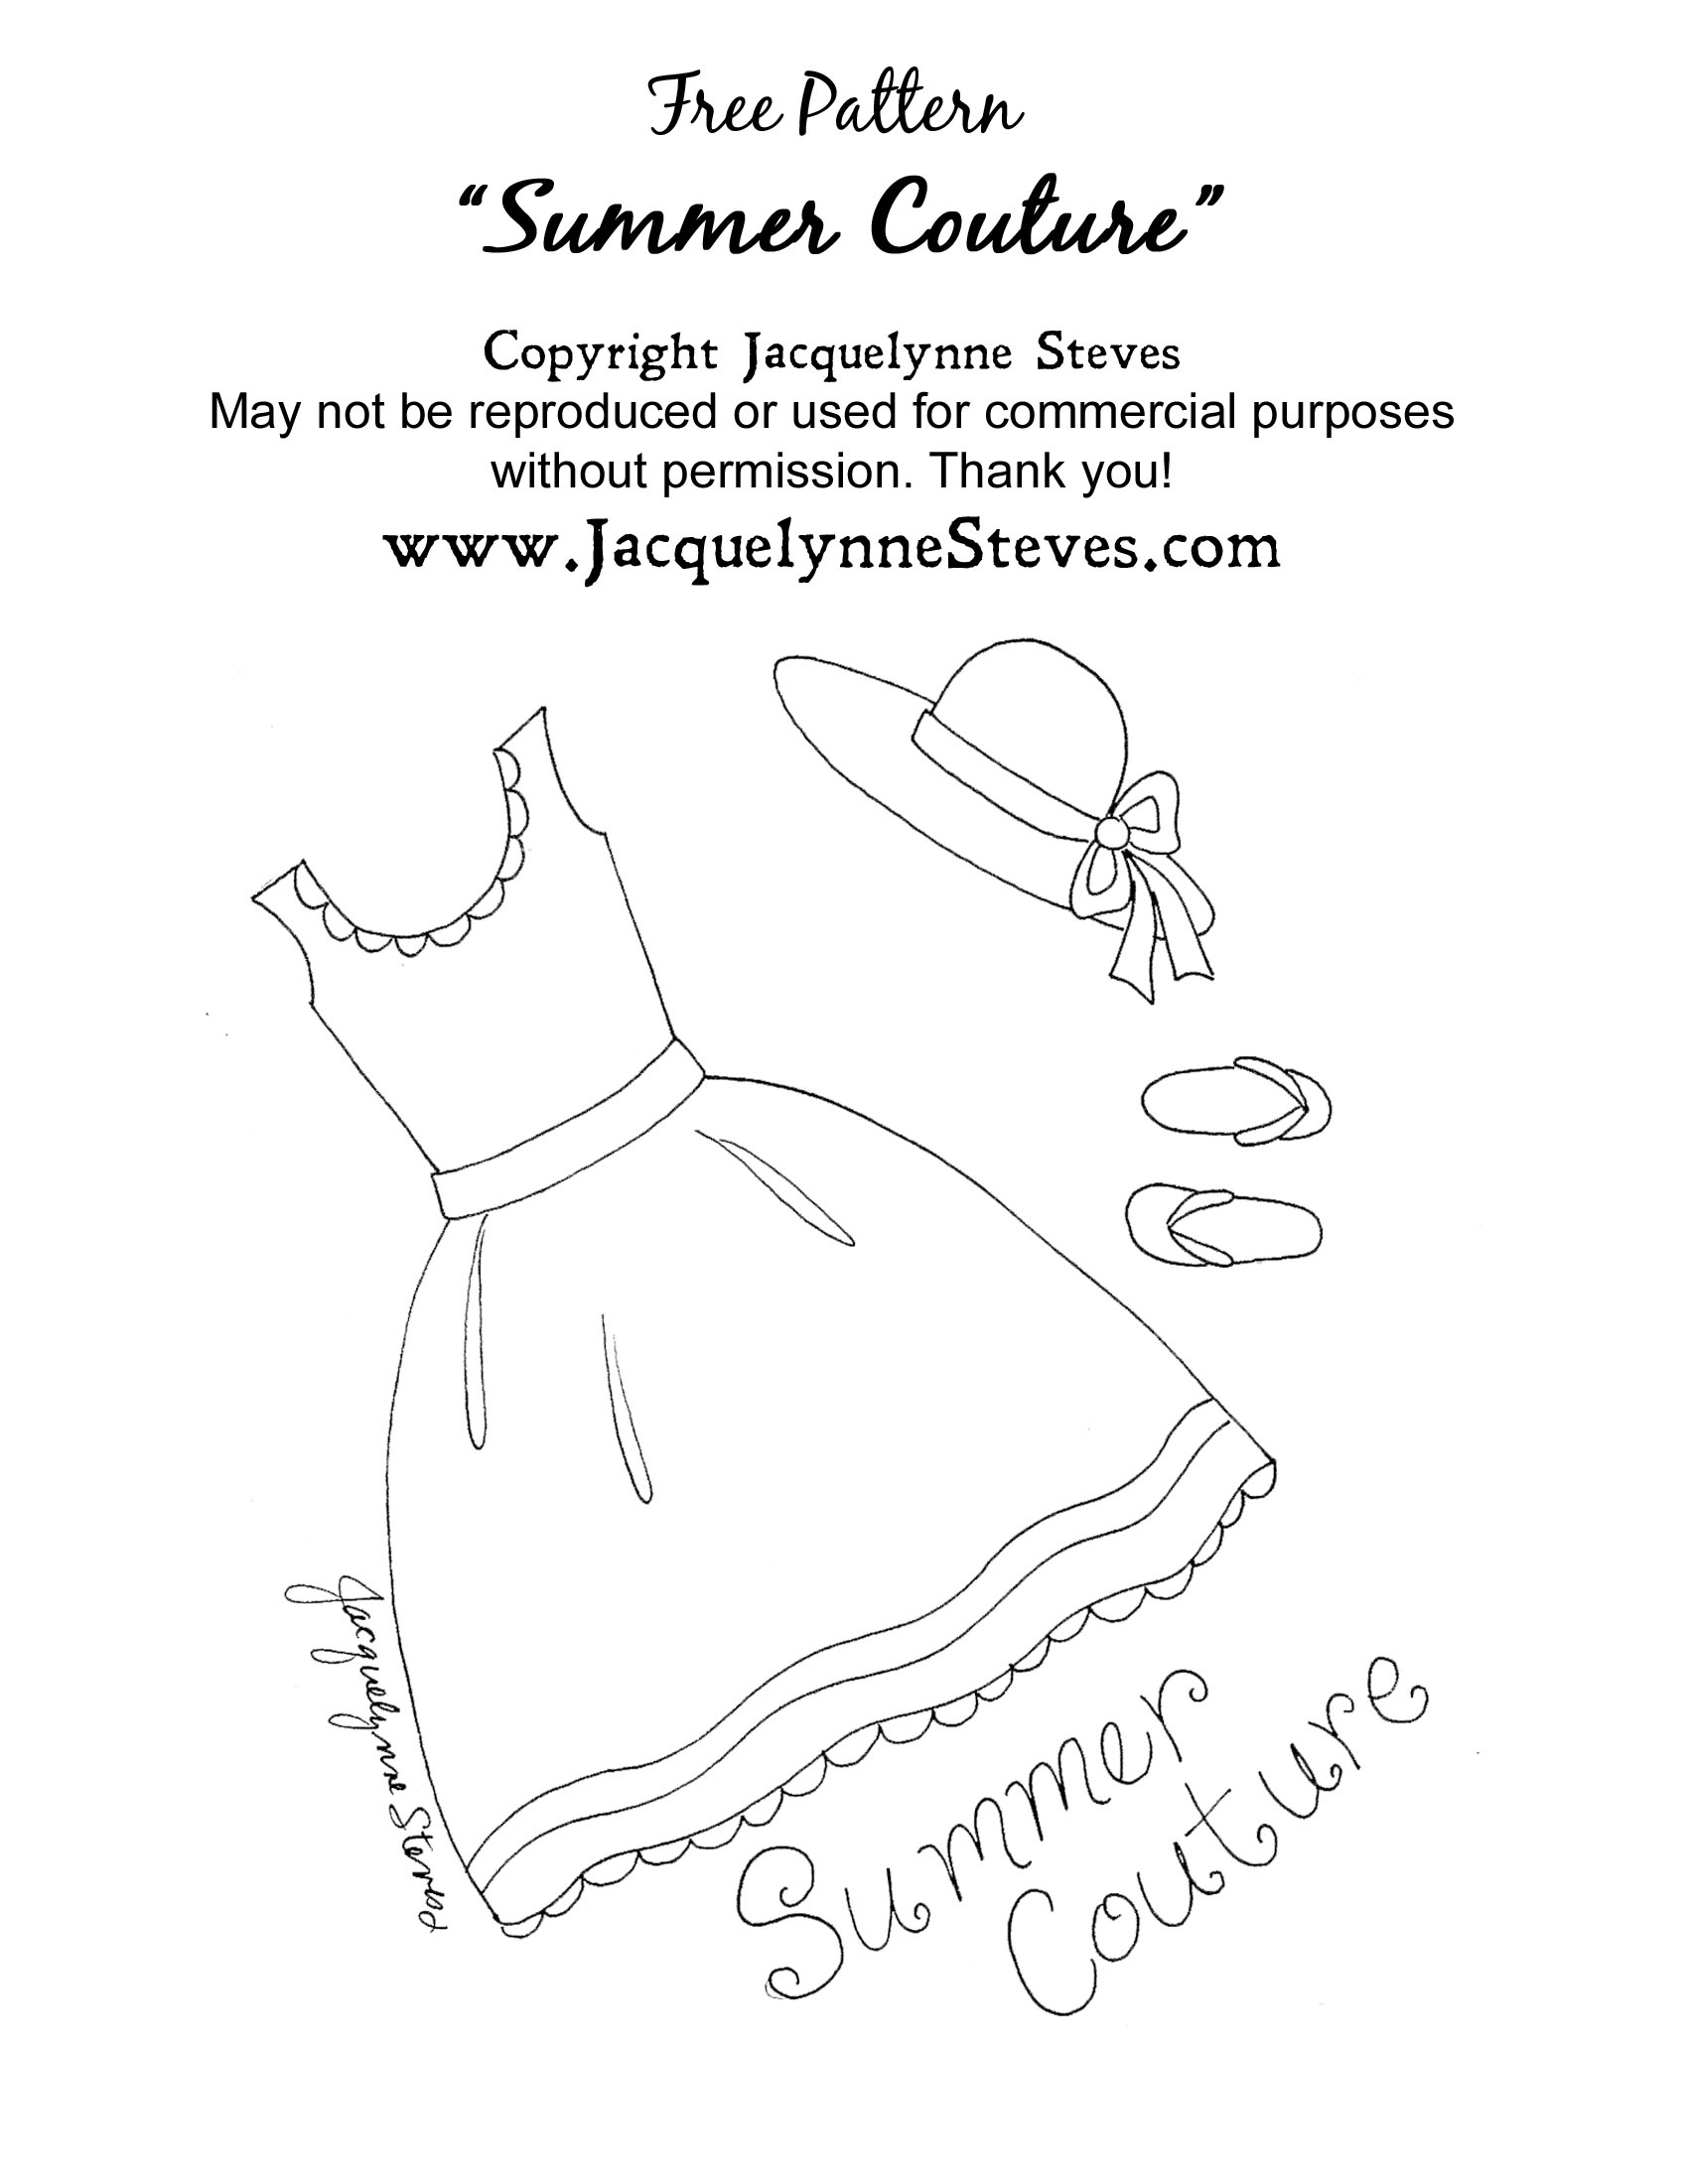 Free Embroidery Pattern Free Summer Couture Embroidery Pattern Jacquelynne Steves